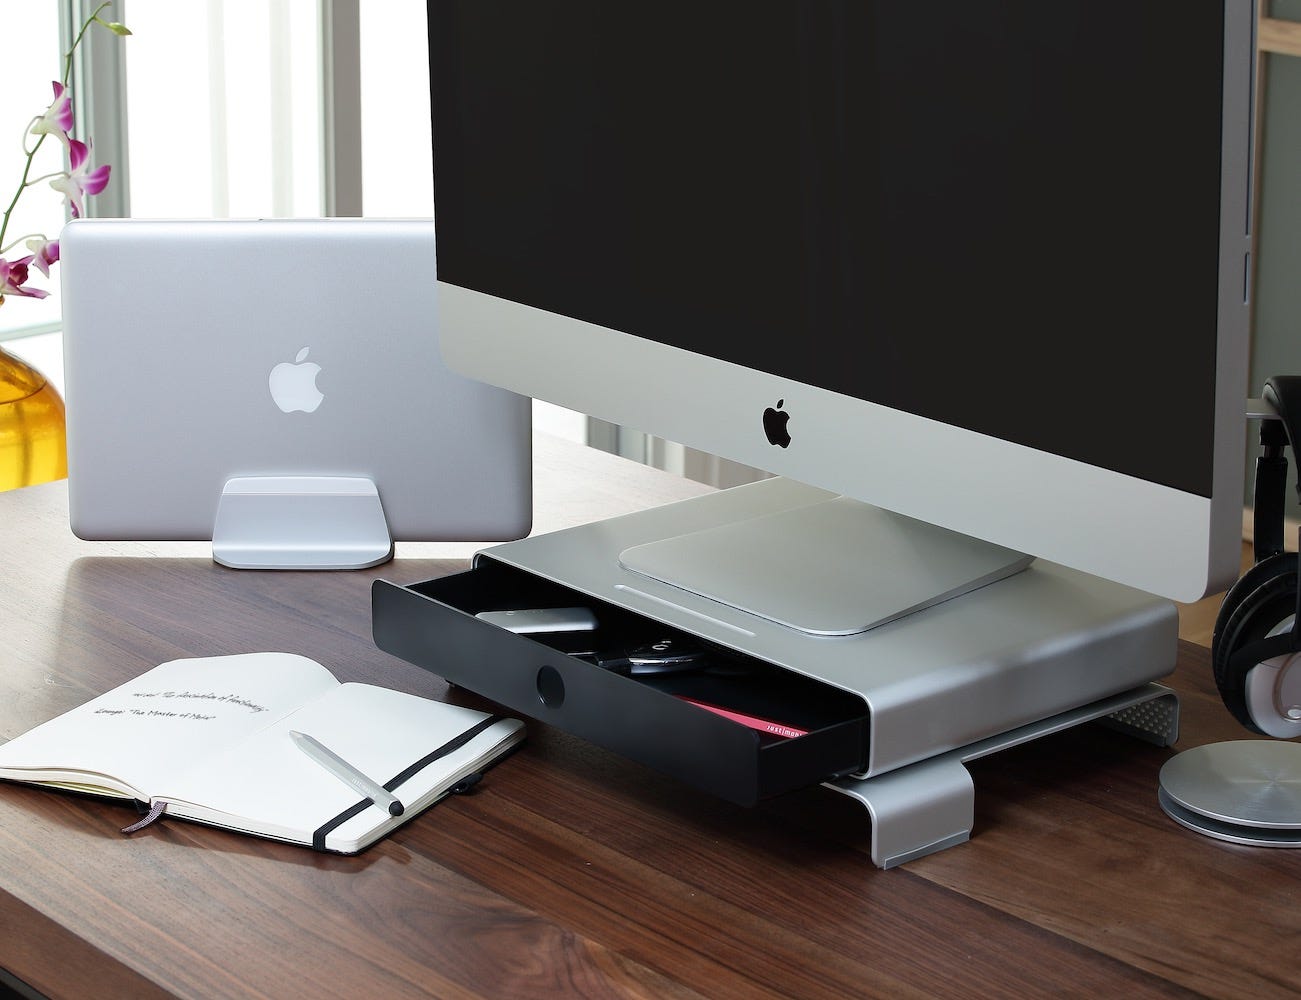 12 Work Desk Accessories That Will Enhance Your Productivity